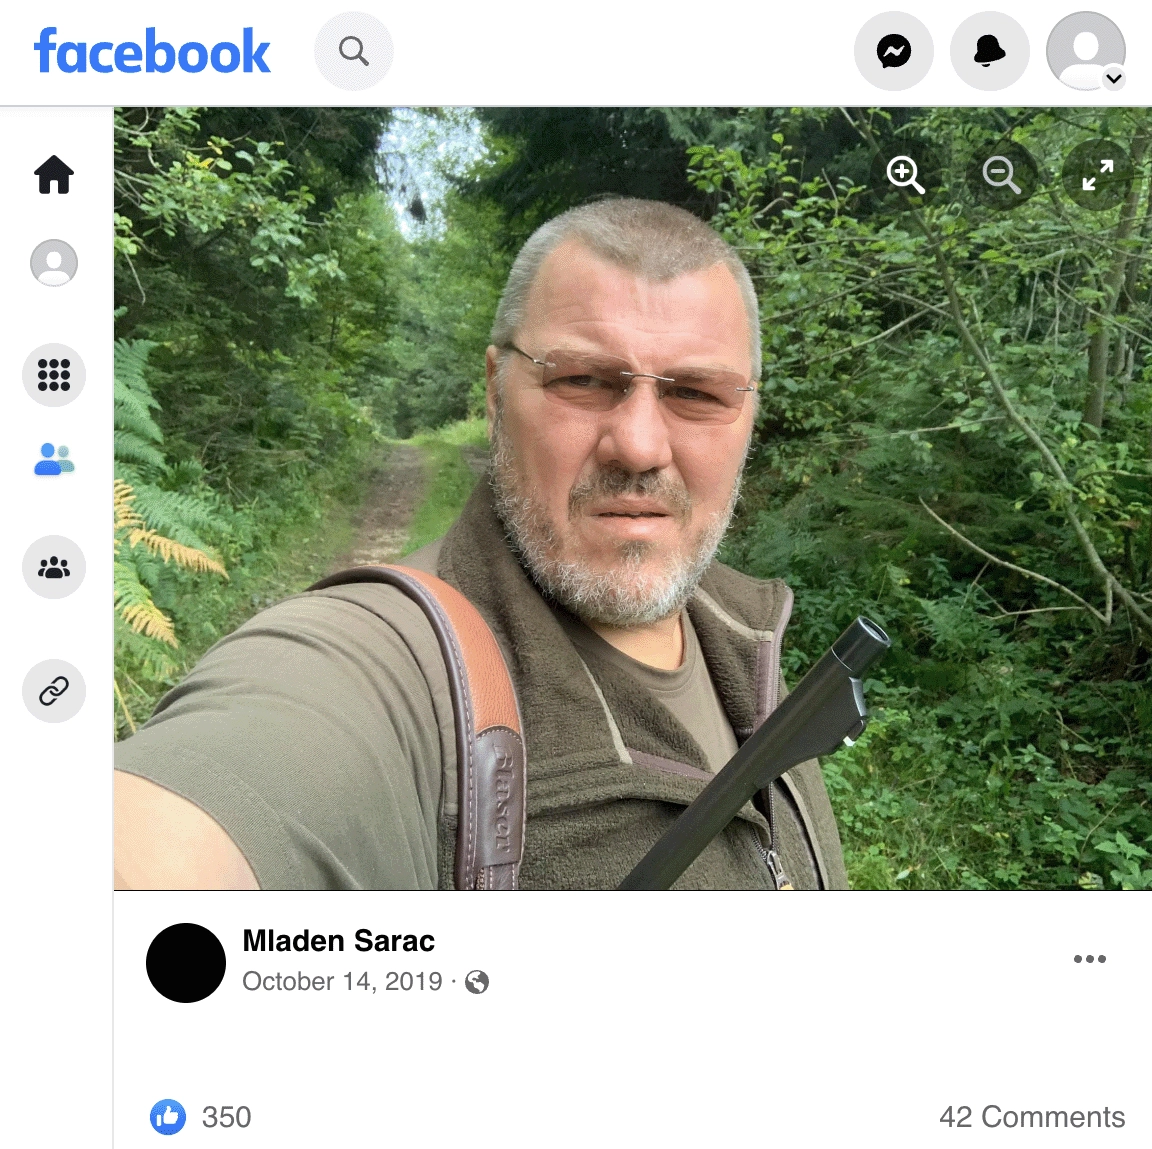 A Facebook photo of Mladen Sarać posted in 2019.